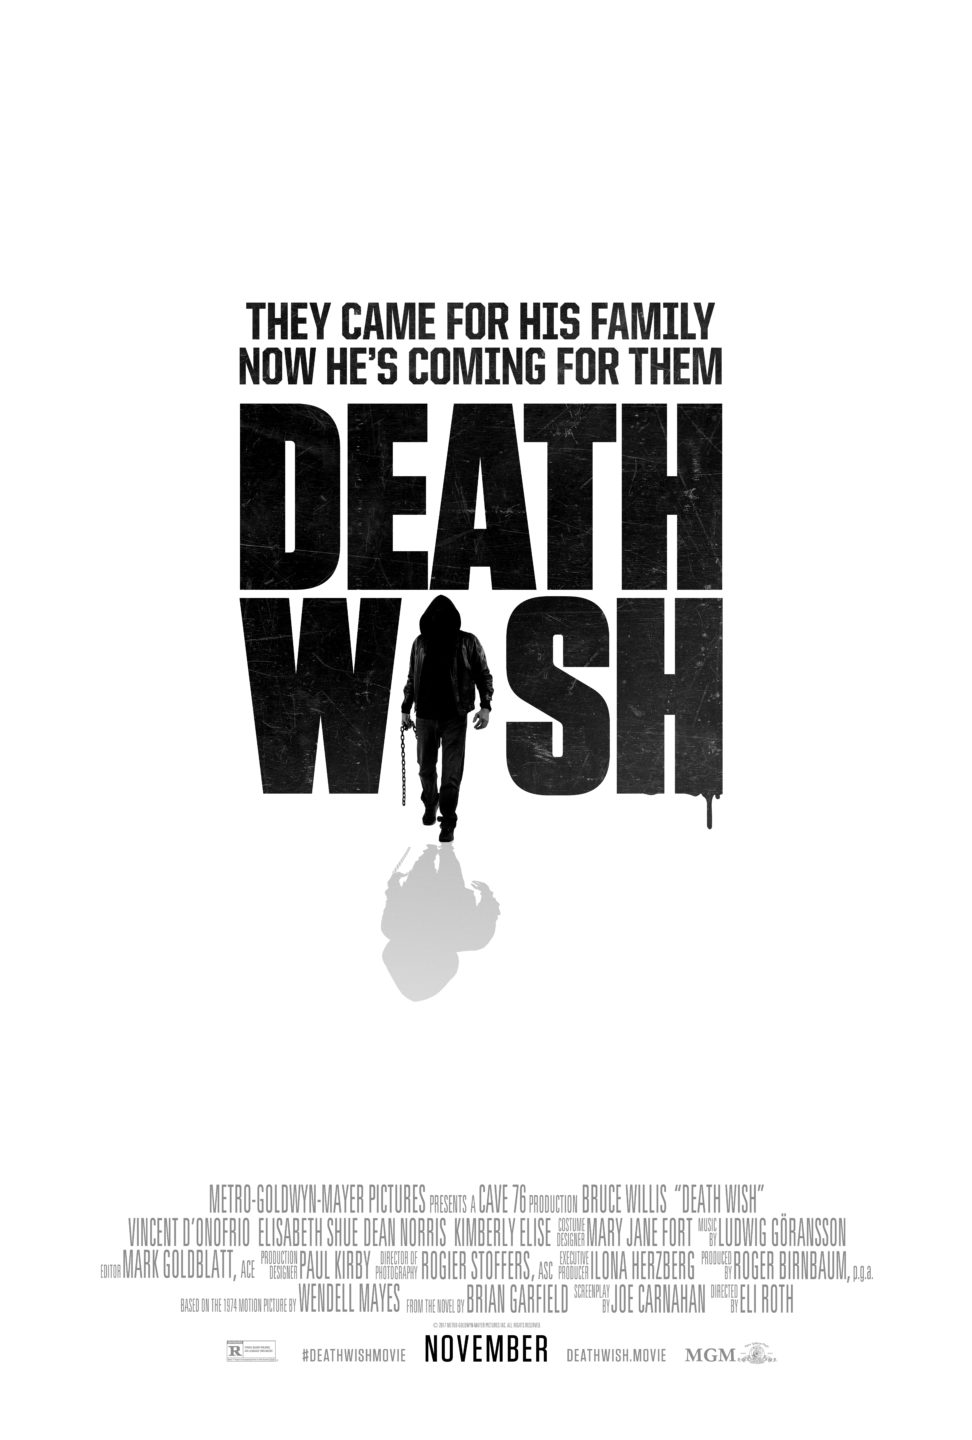 Death Wish poster (MGM Pictures)